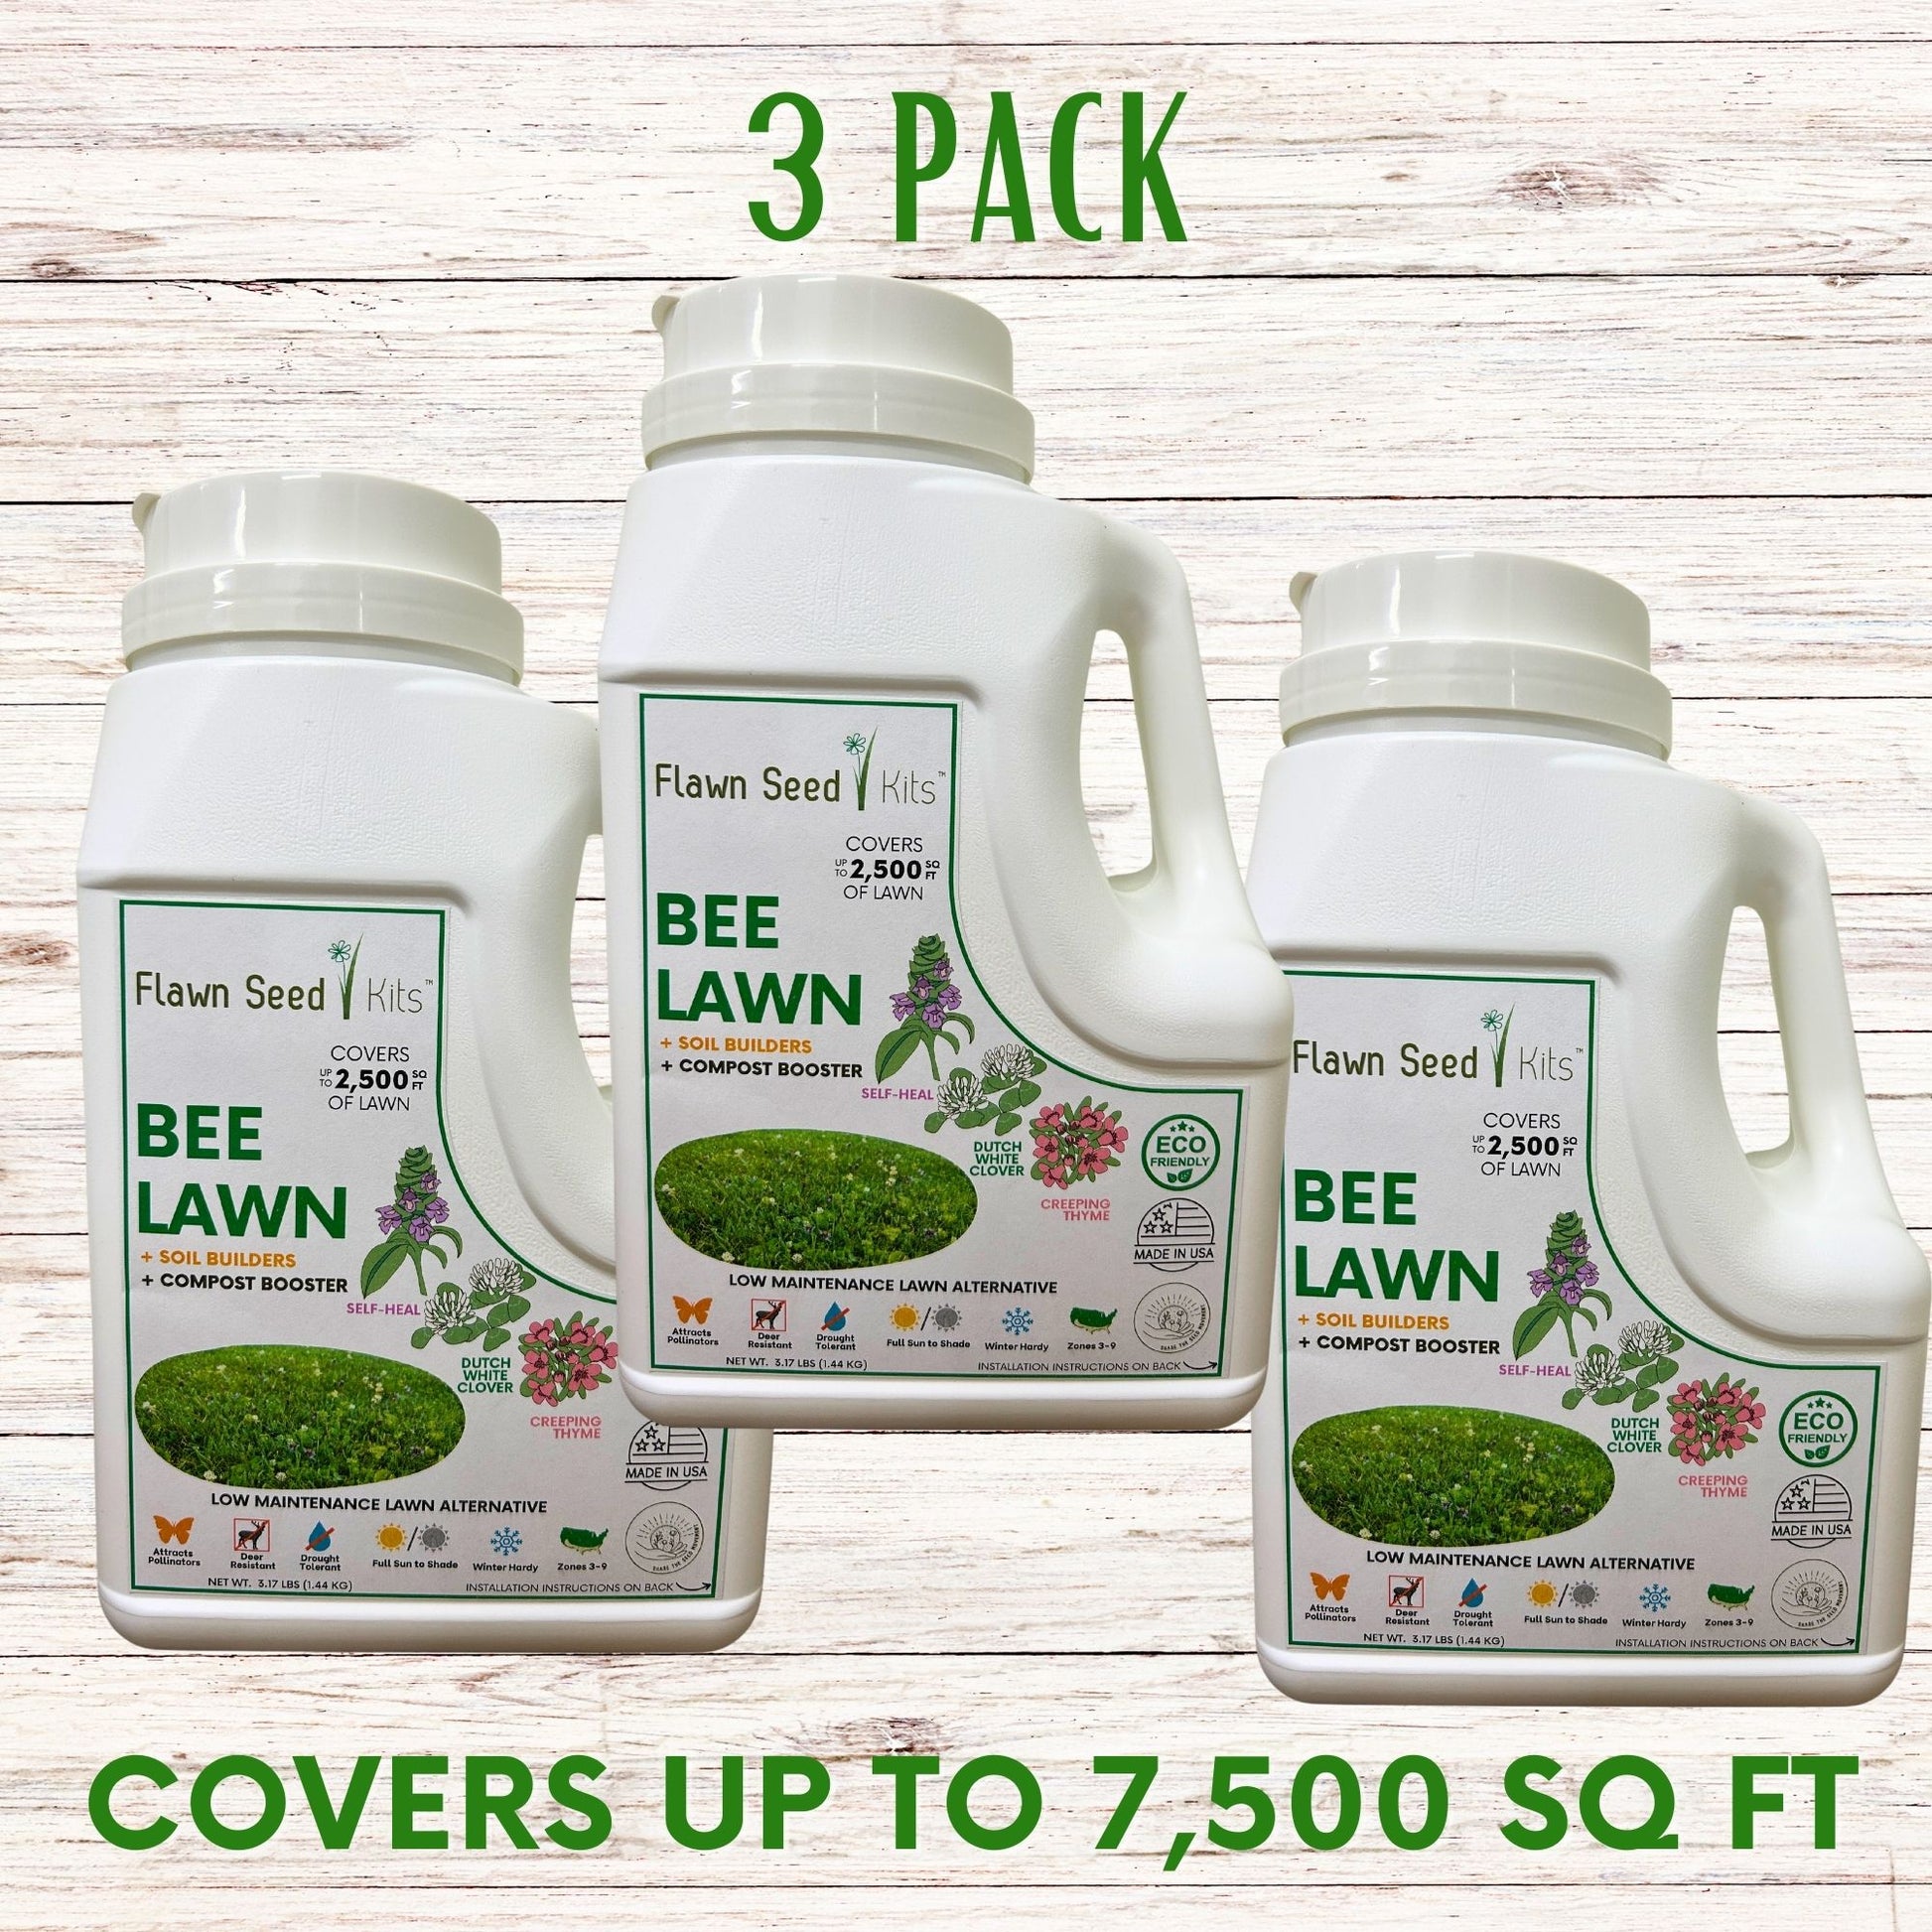 Bee Lawn Flowering Pollinator Seed Kit, Dutch White Clover, Self-Heal, Creeping Thyme, Easy Spread Container 3 Pack Covers 7,500 square feet